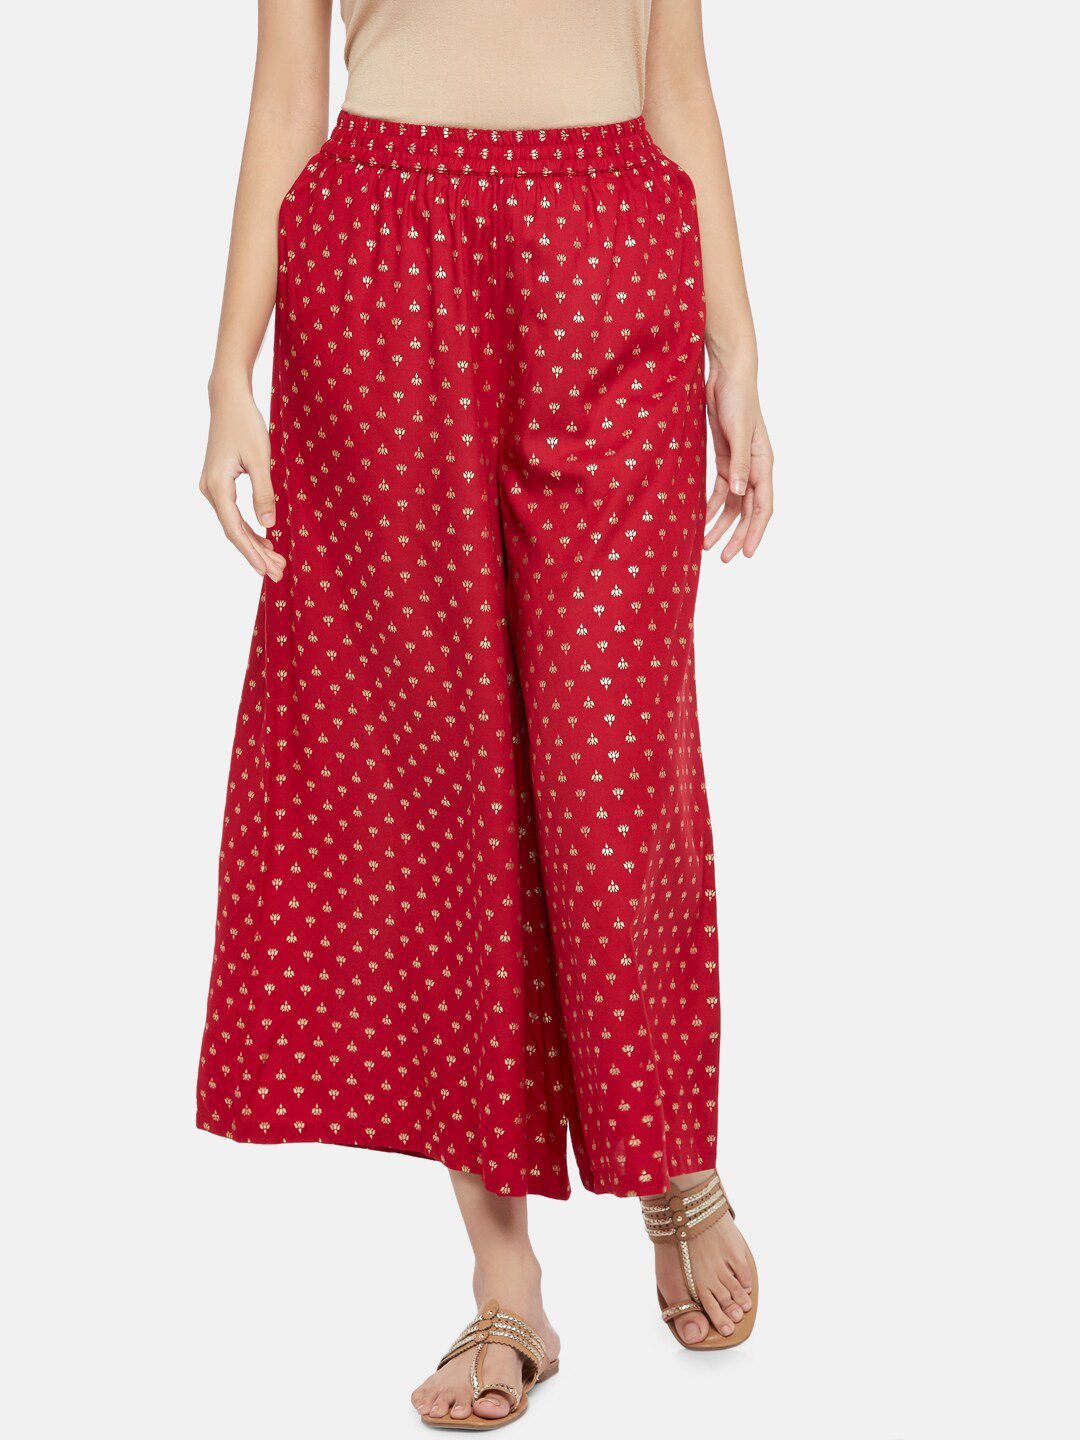 RANGMANCH BY PANTALOONS Women Red & White Ethnic Motifs Printed Ethnic Palazzos Price in India